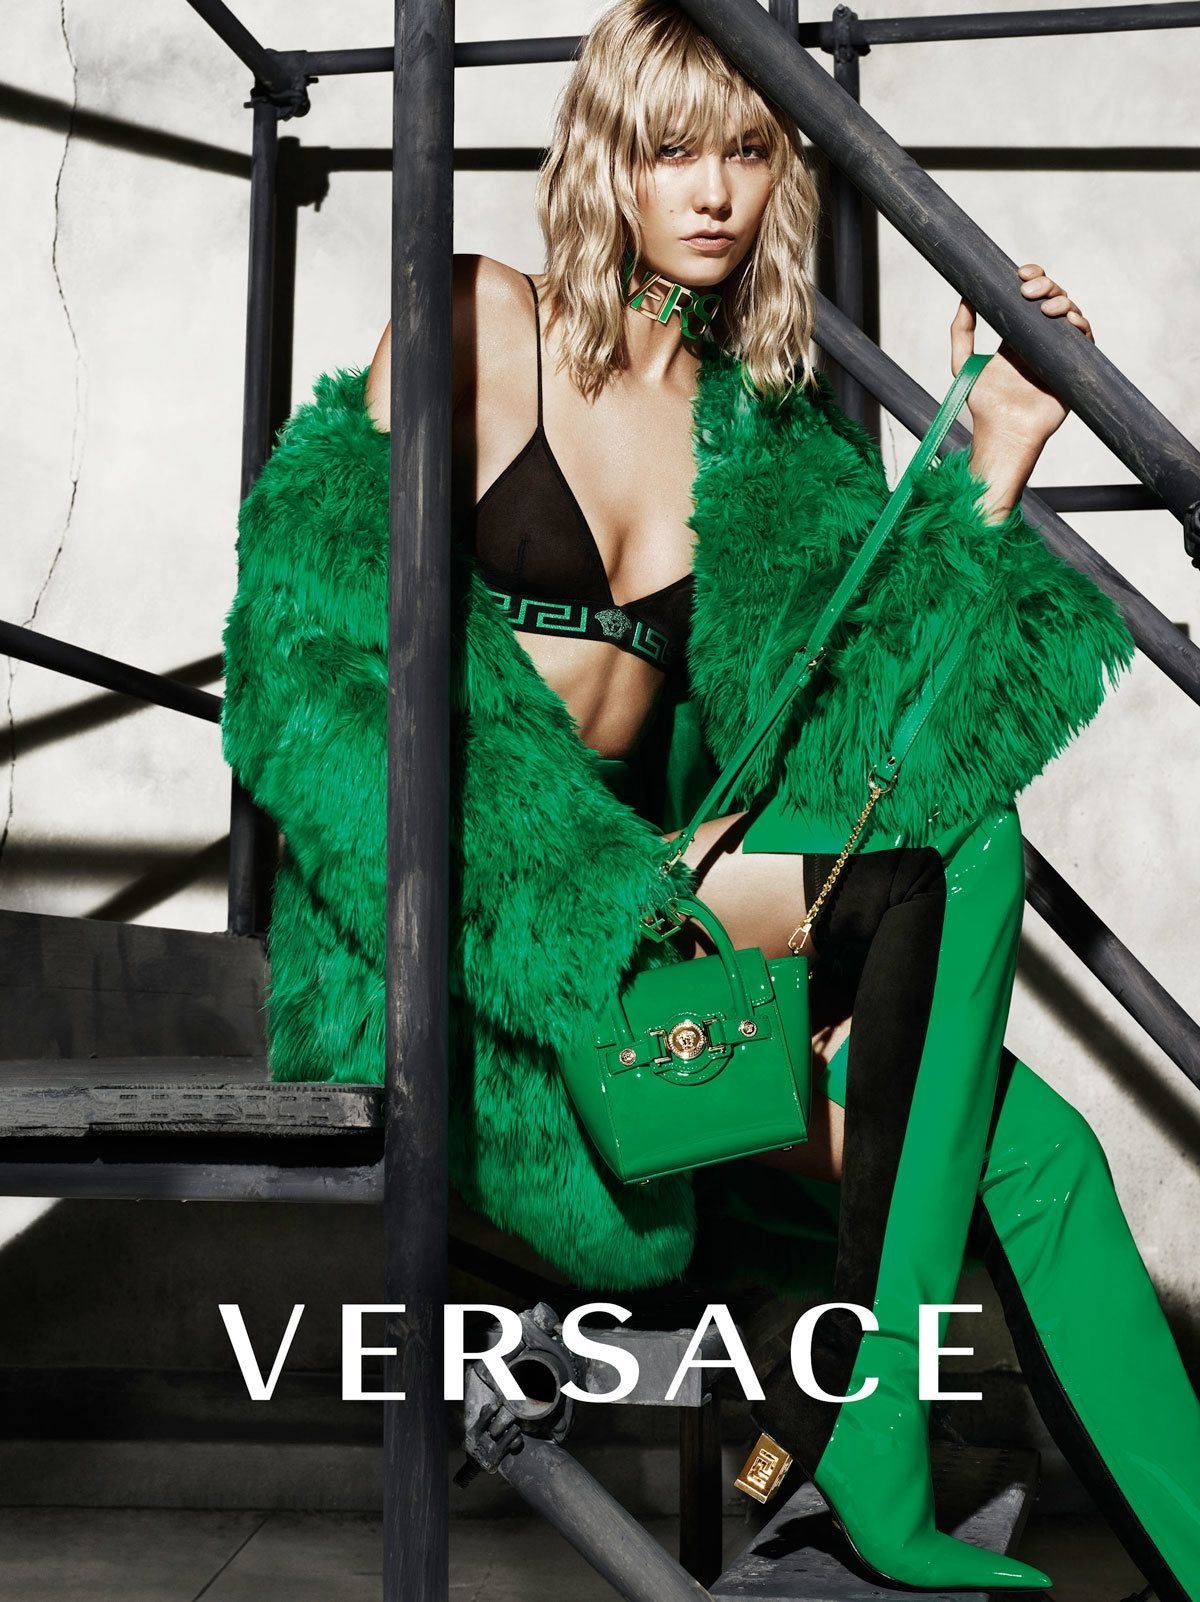 Versace brand follows in the footsteps of Gucci and Michael Kors: Say no to fur materials